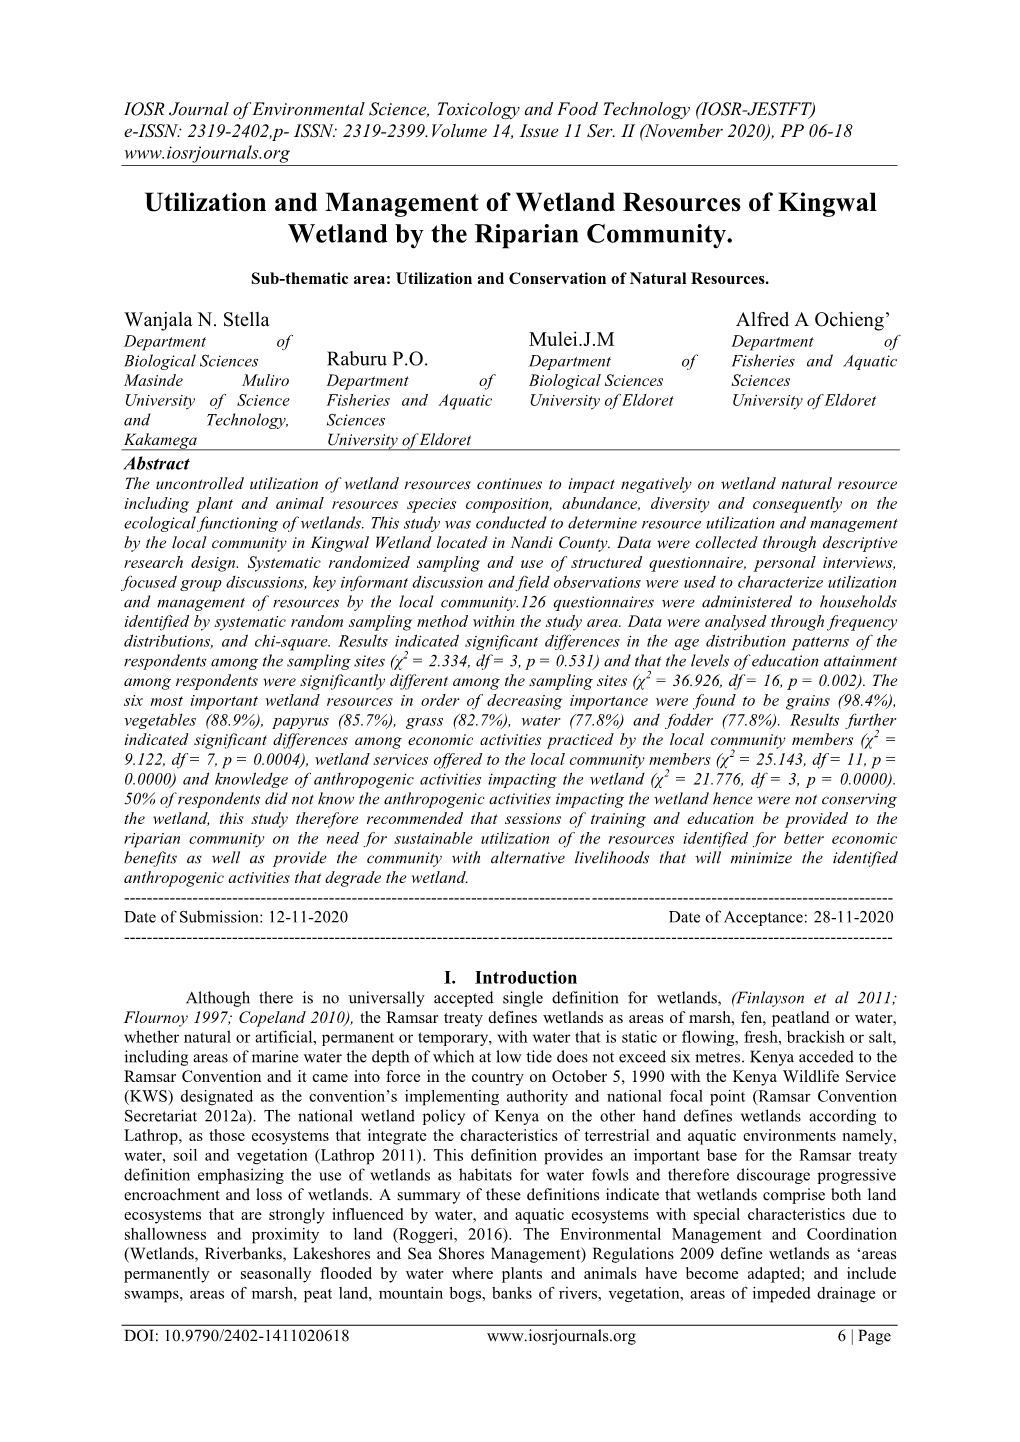 Utilization and Management of Wetland Resources of Kingwal Wetland by the Riparian Community